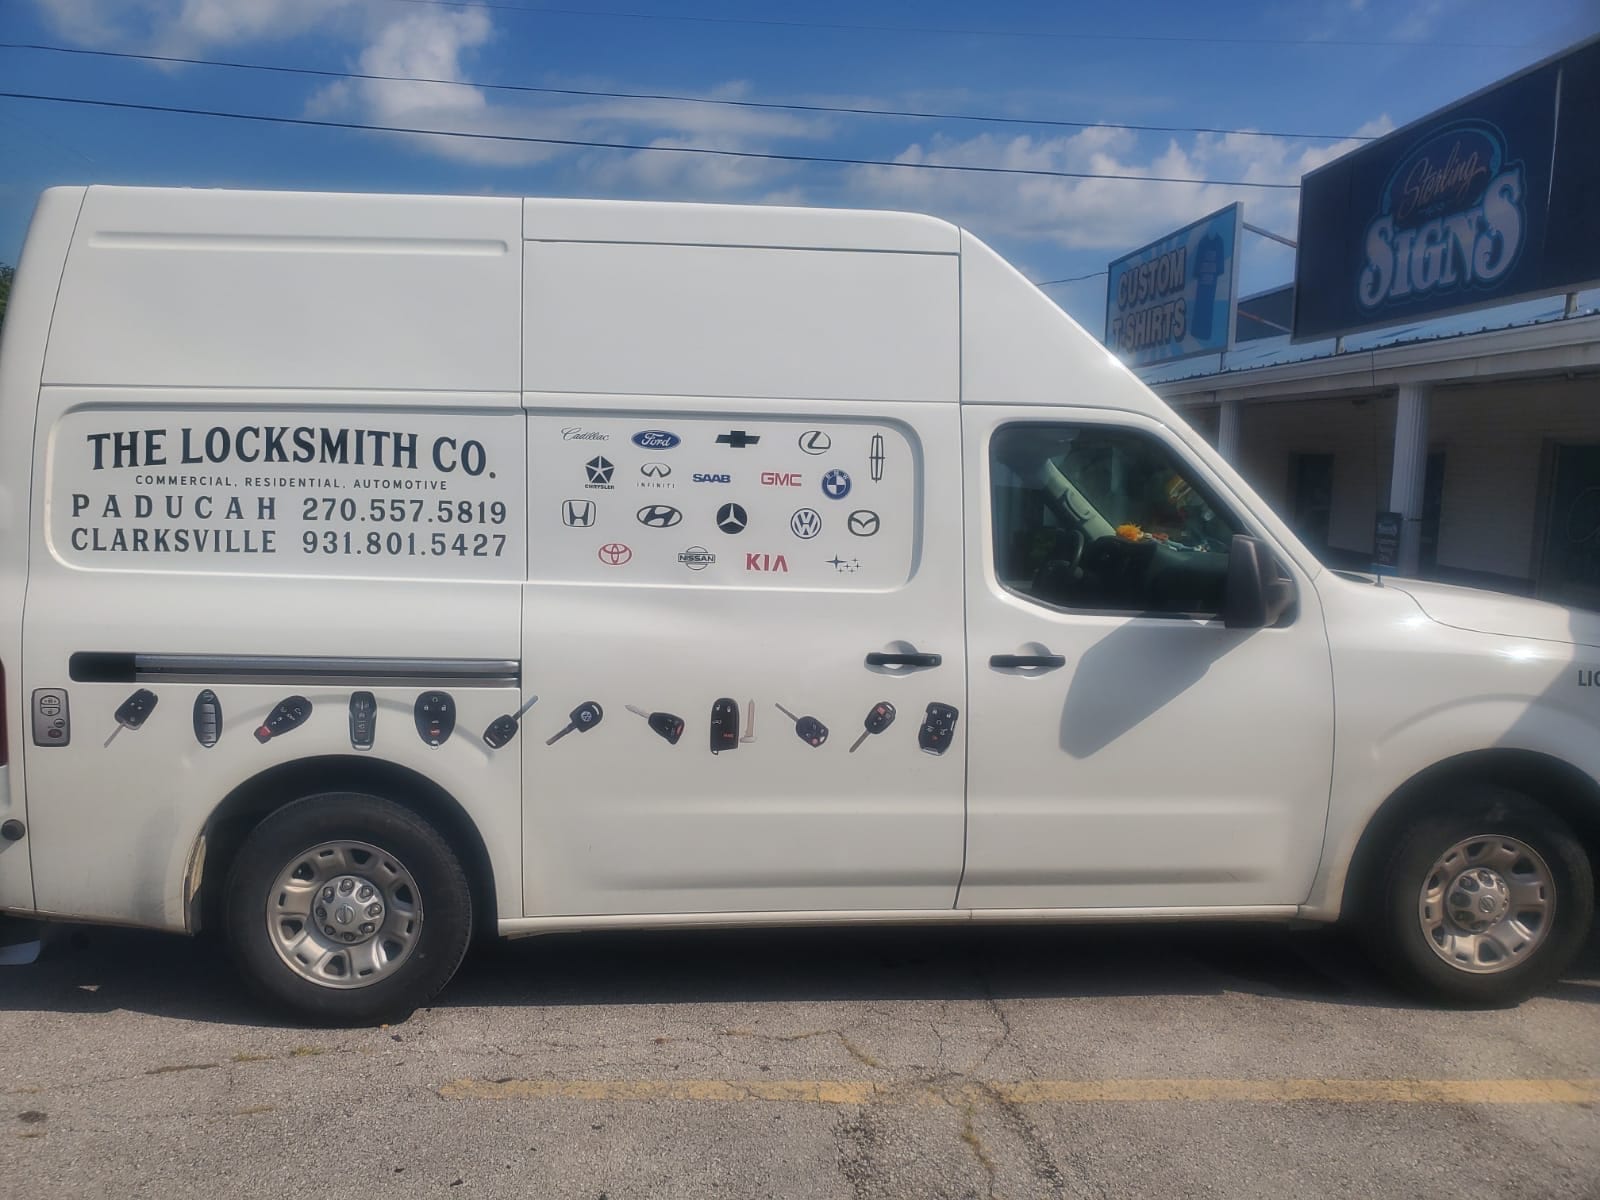 Mobile Locksmith with 24/7 Emergency Service, Damage-Free Lockout Service, Lost Key and Smart Key Replacement and Duplication.